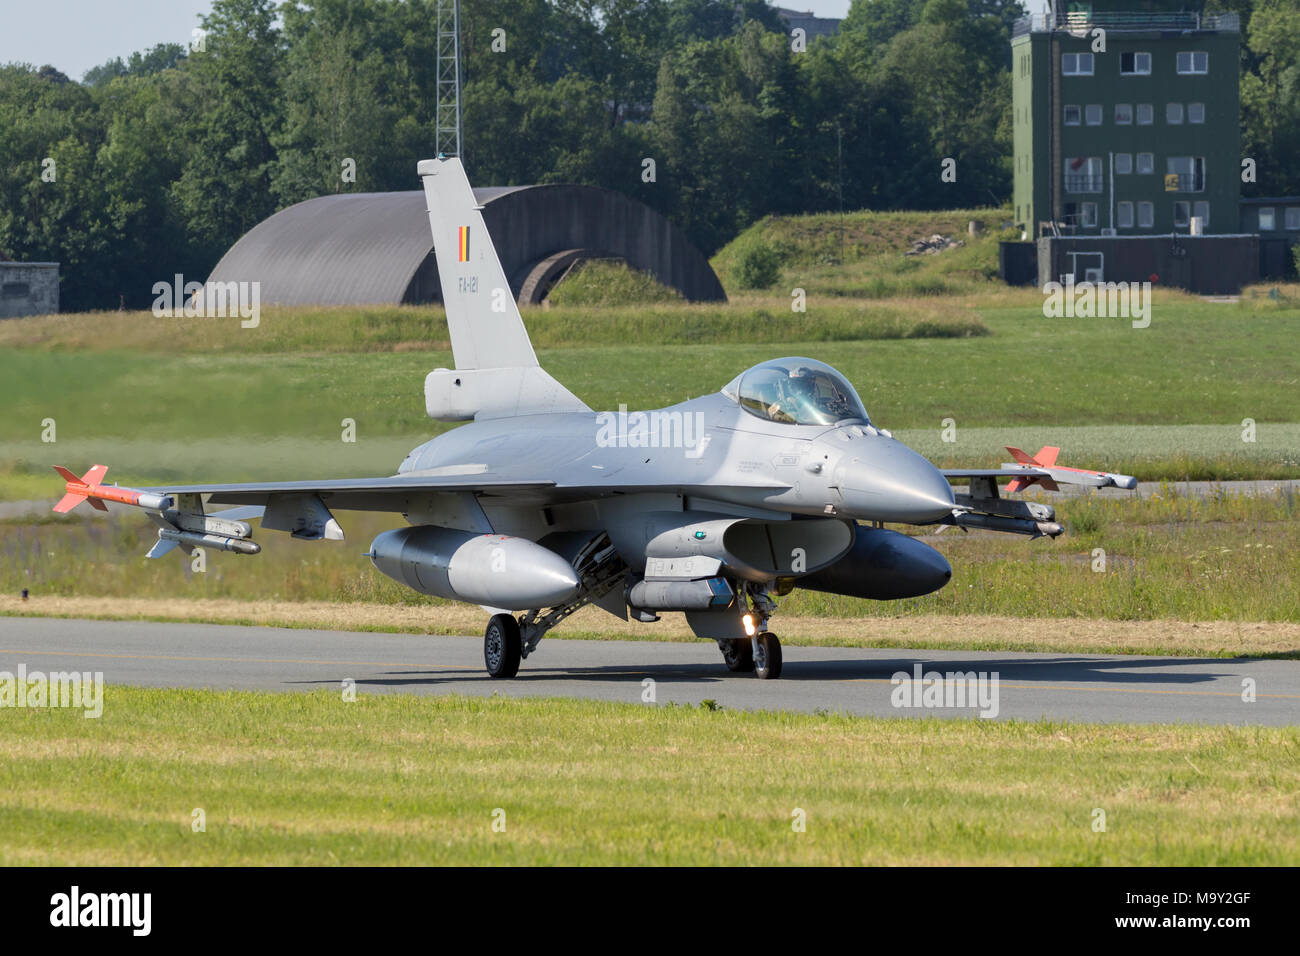 FLORENNES, BELGIUM - JUN 15, 2017: Belgian Air Force F-16 fighter jet plane taxiing to the runway of Florennes airbase. Stock Photo